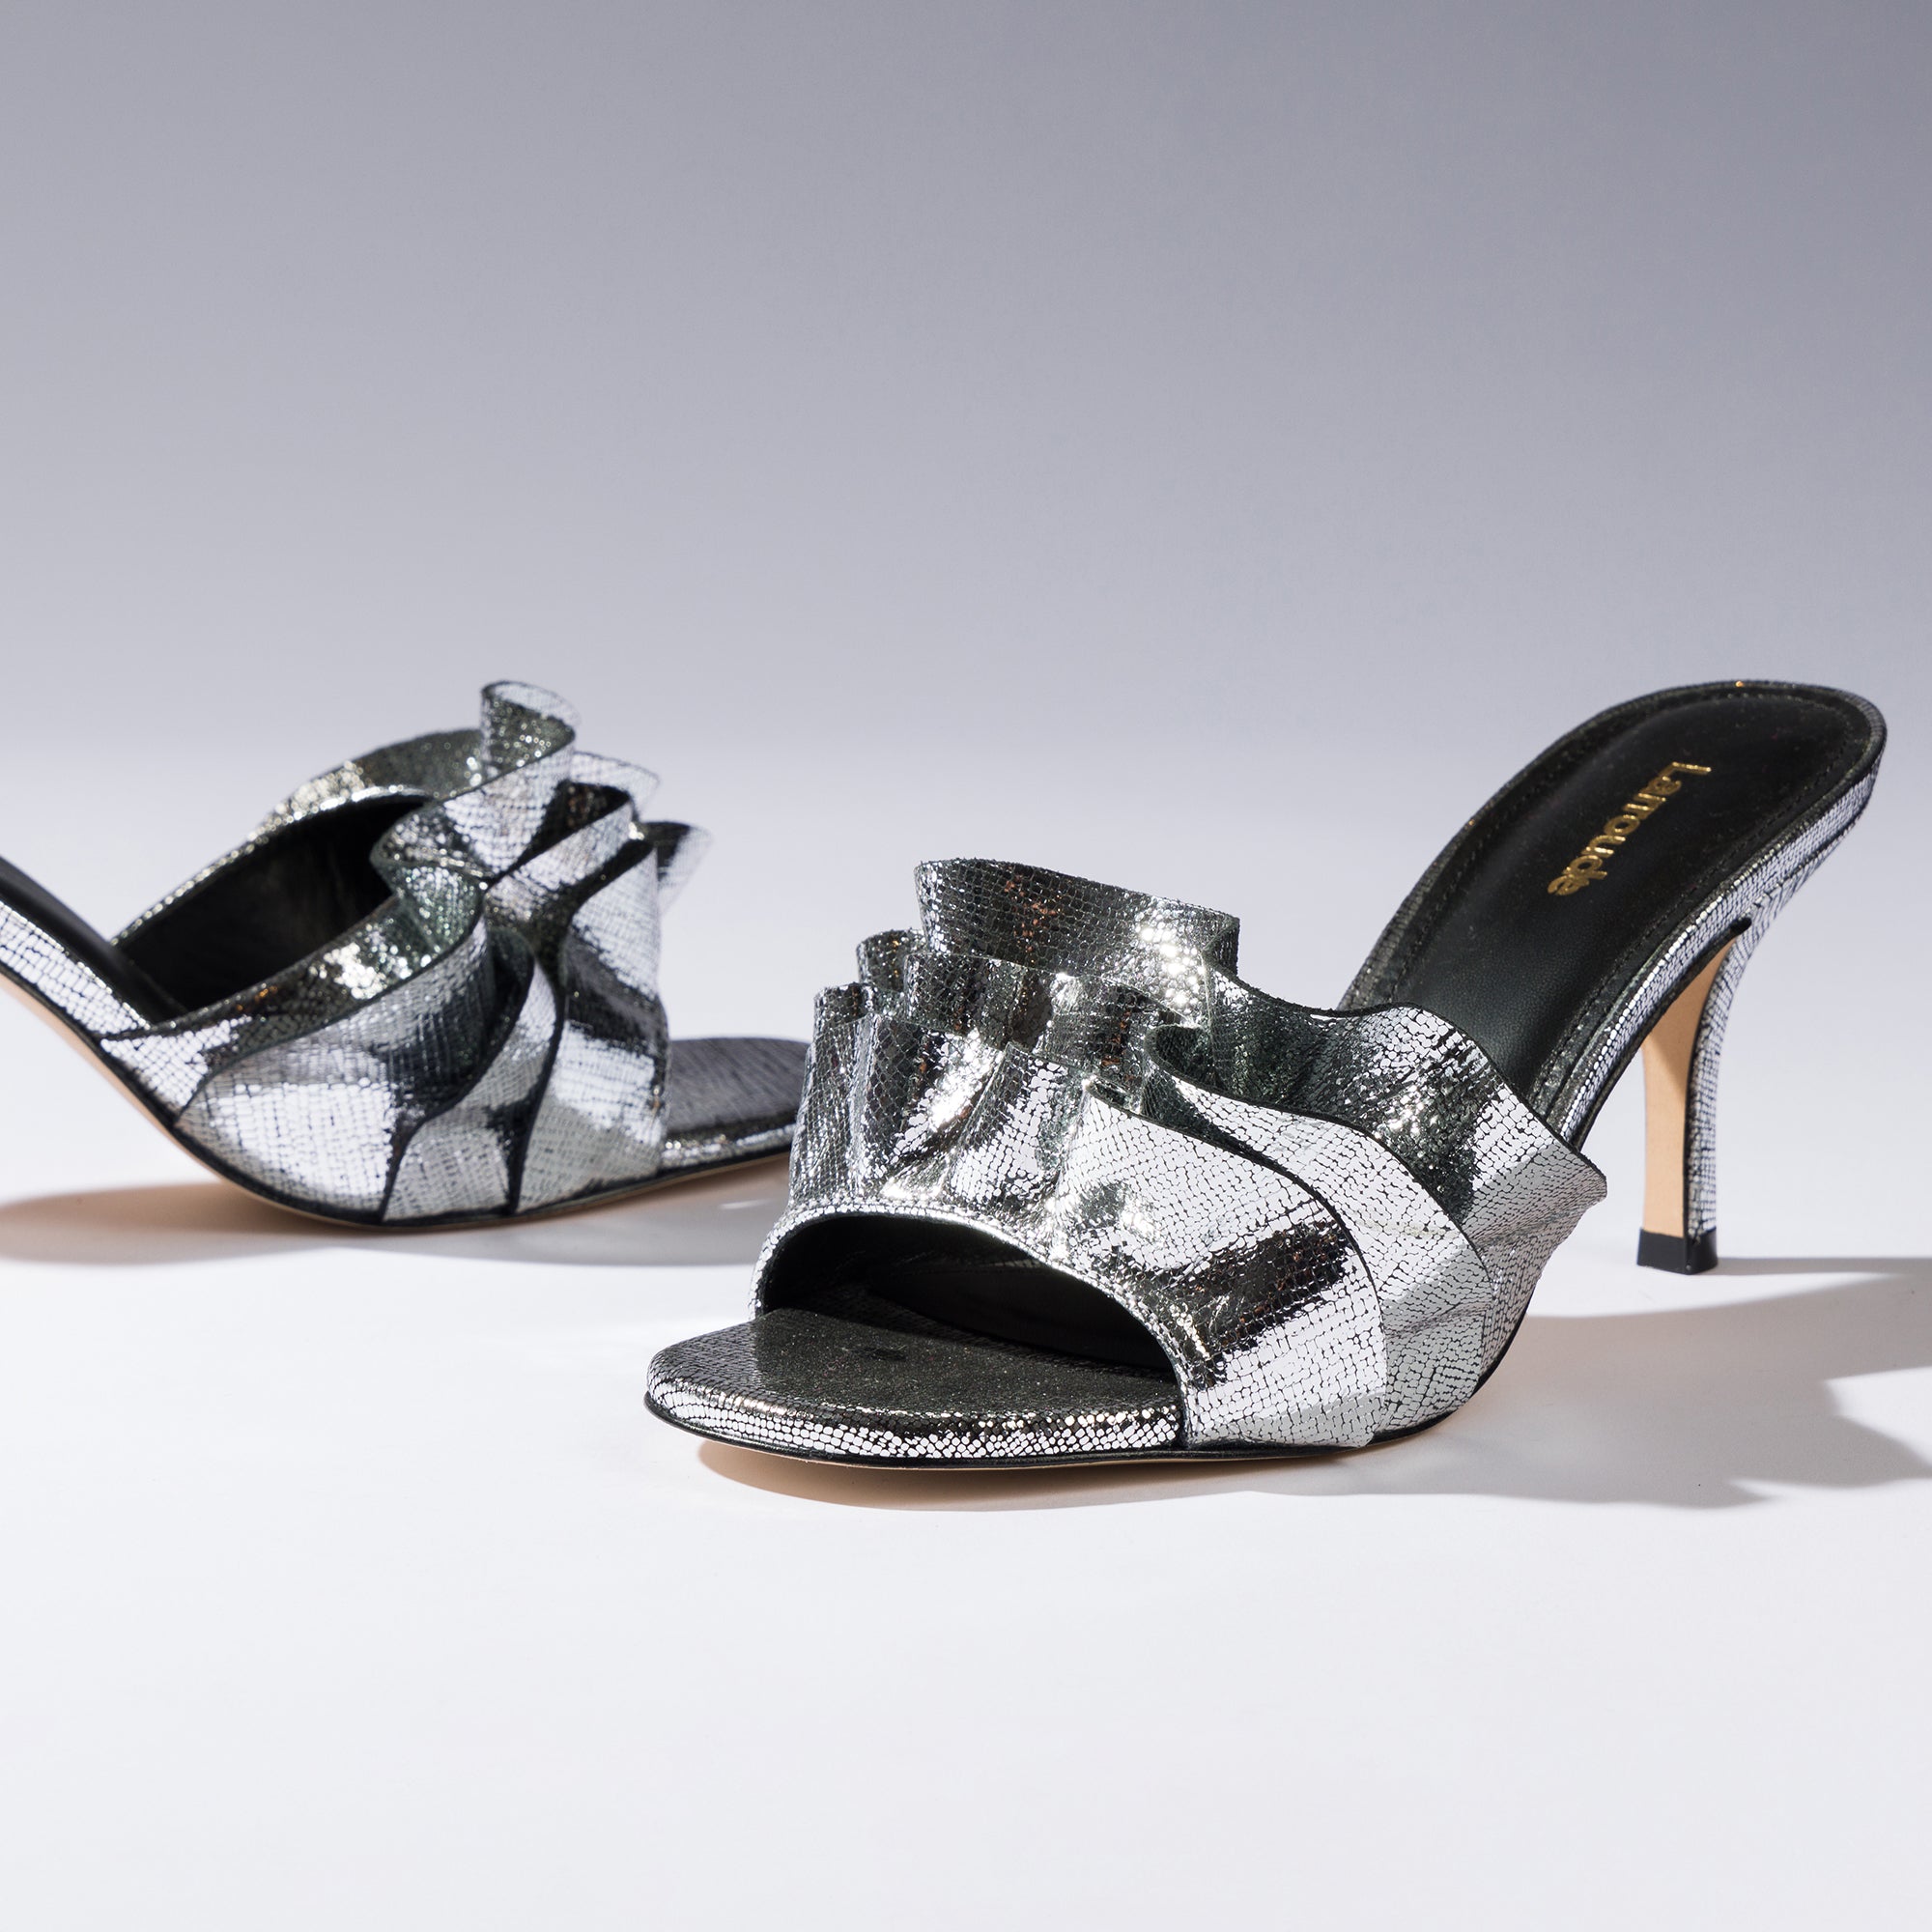 Colette Ruffle Mule In Silver Cracked Metallic Leather